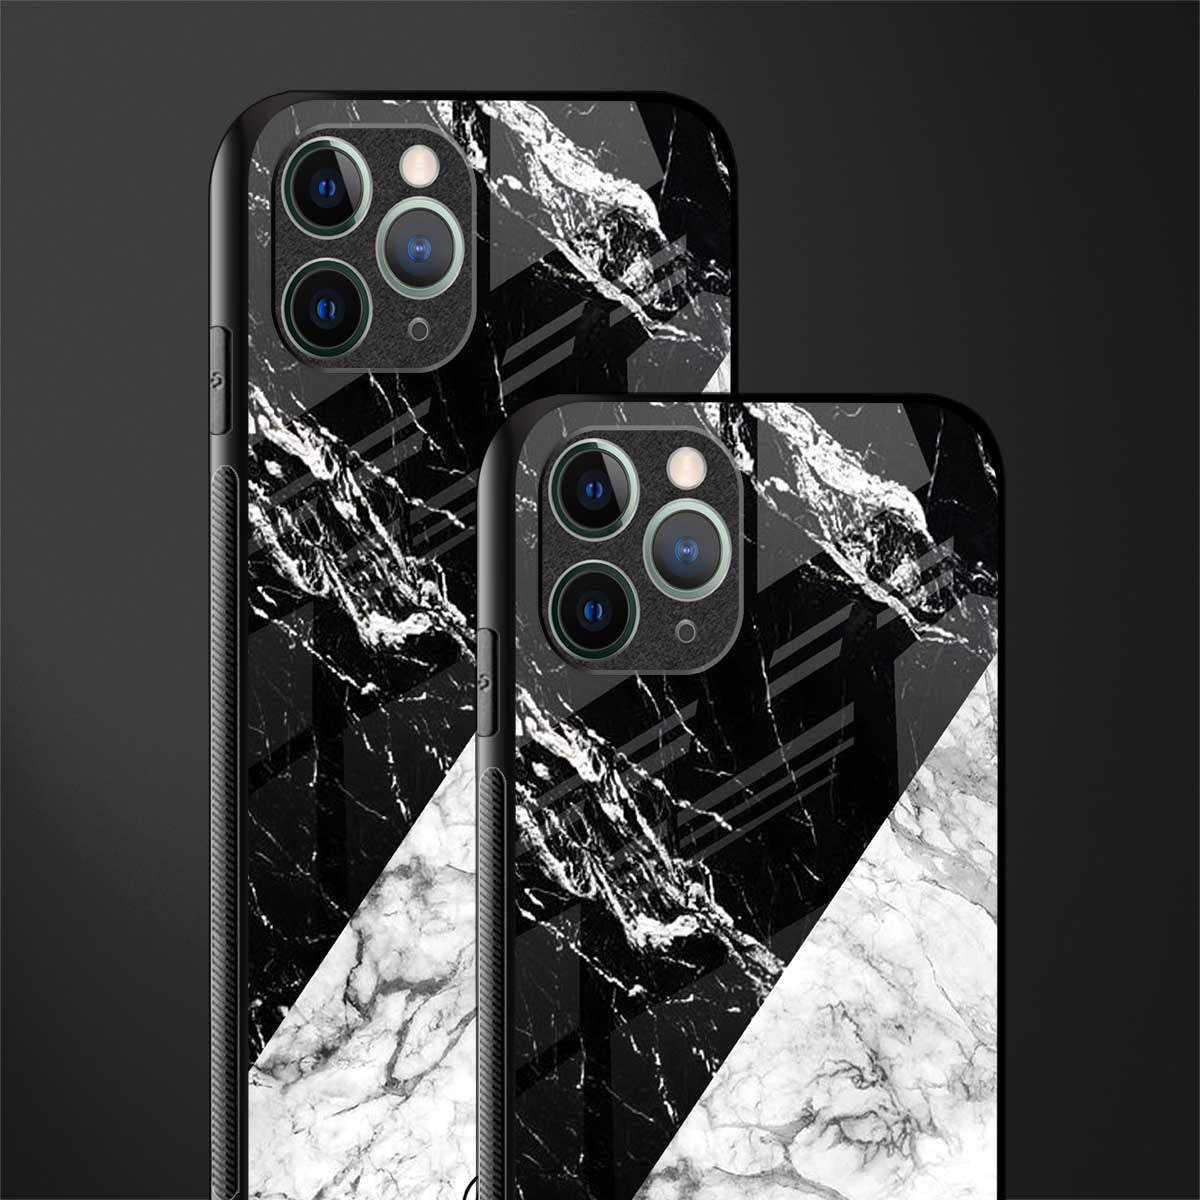 fatal contradiction phone cover for iphone 11 pro max